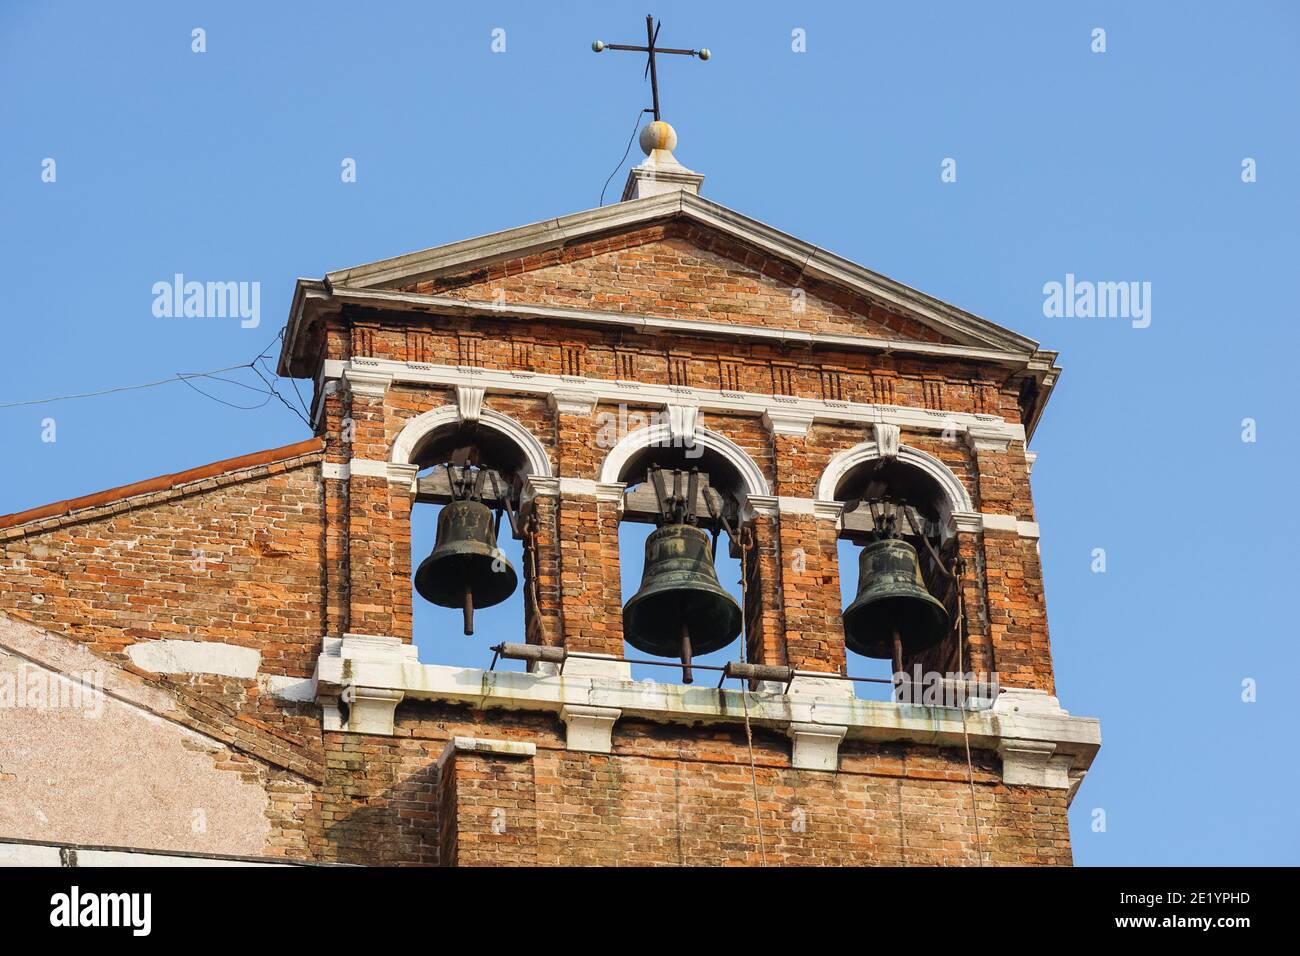 Three bells at the bell tower of the church in Venice, Italy Stock Photo